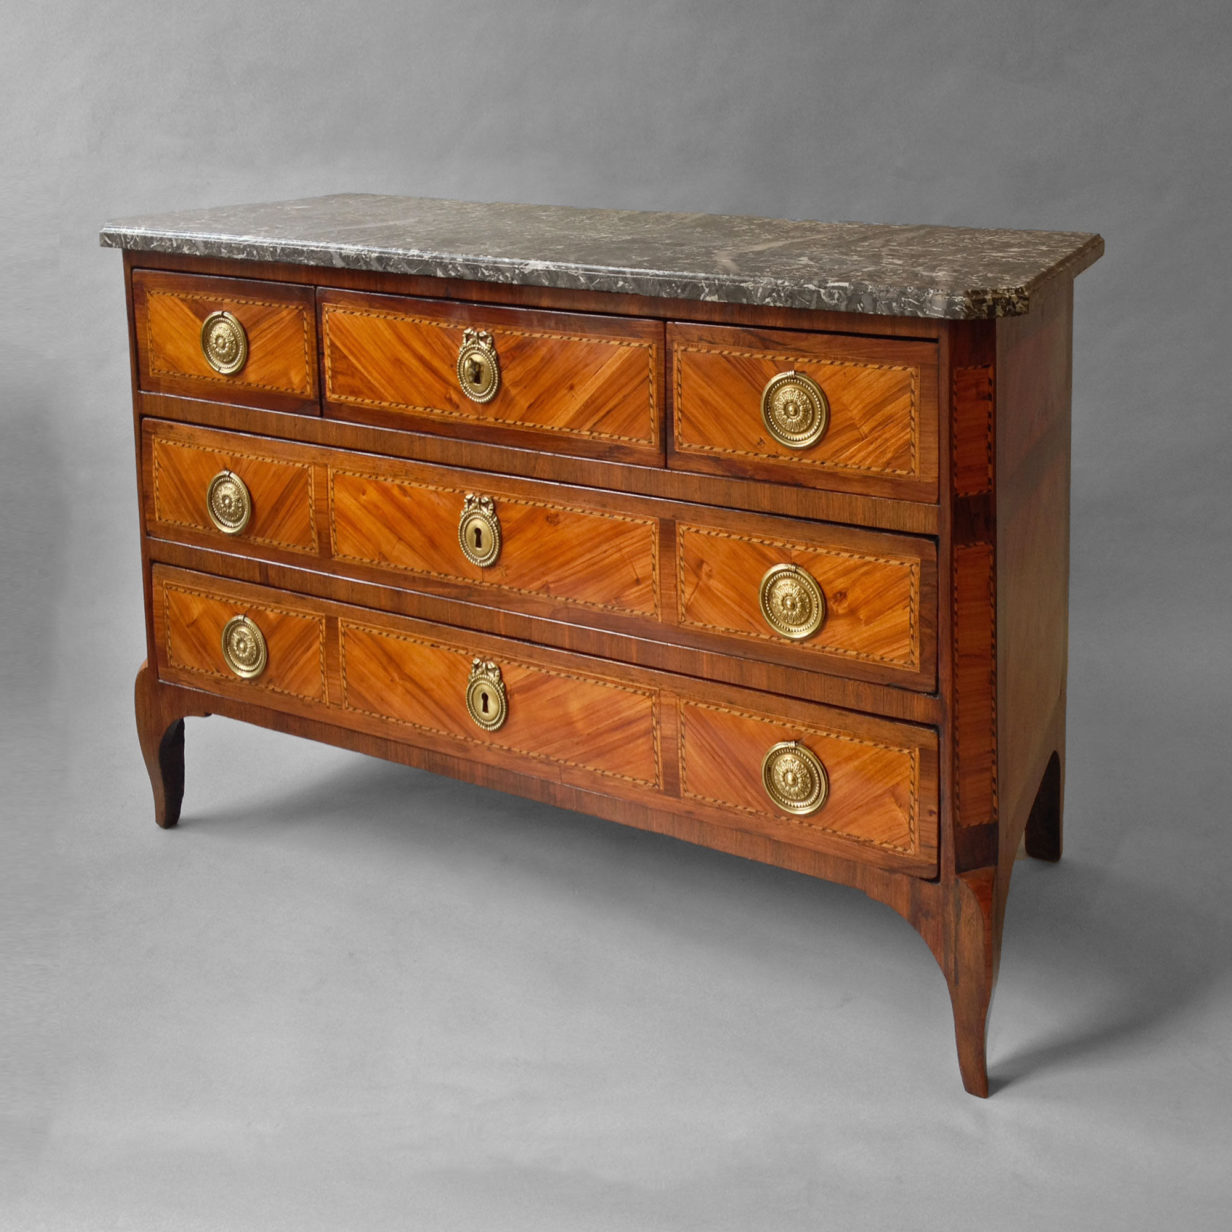 A mid-18th century transitional commode